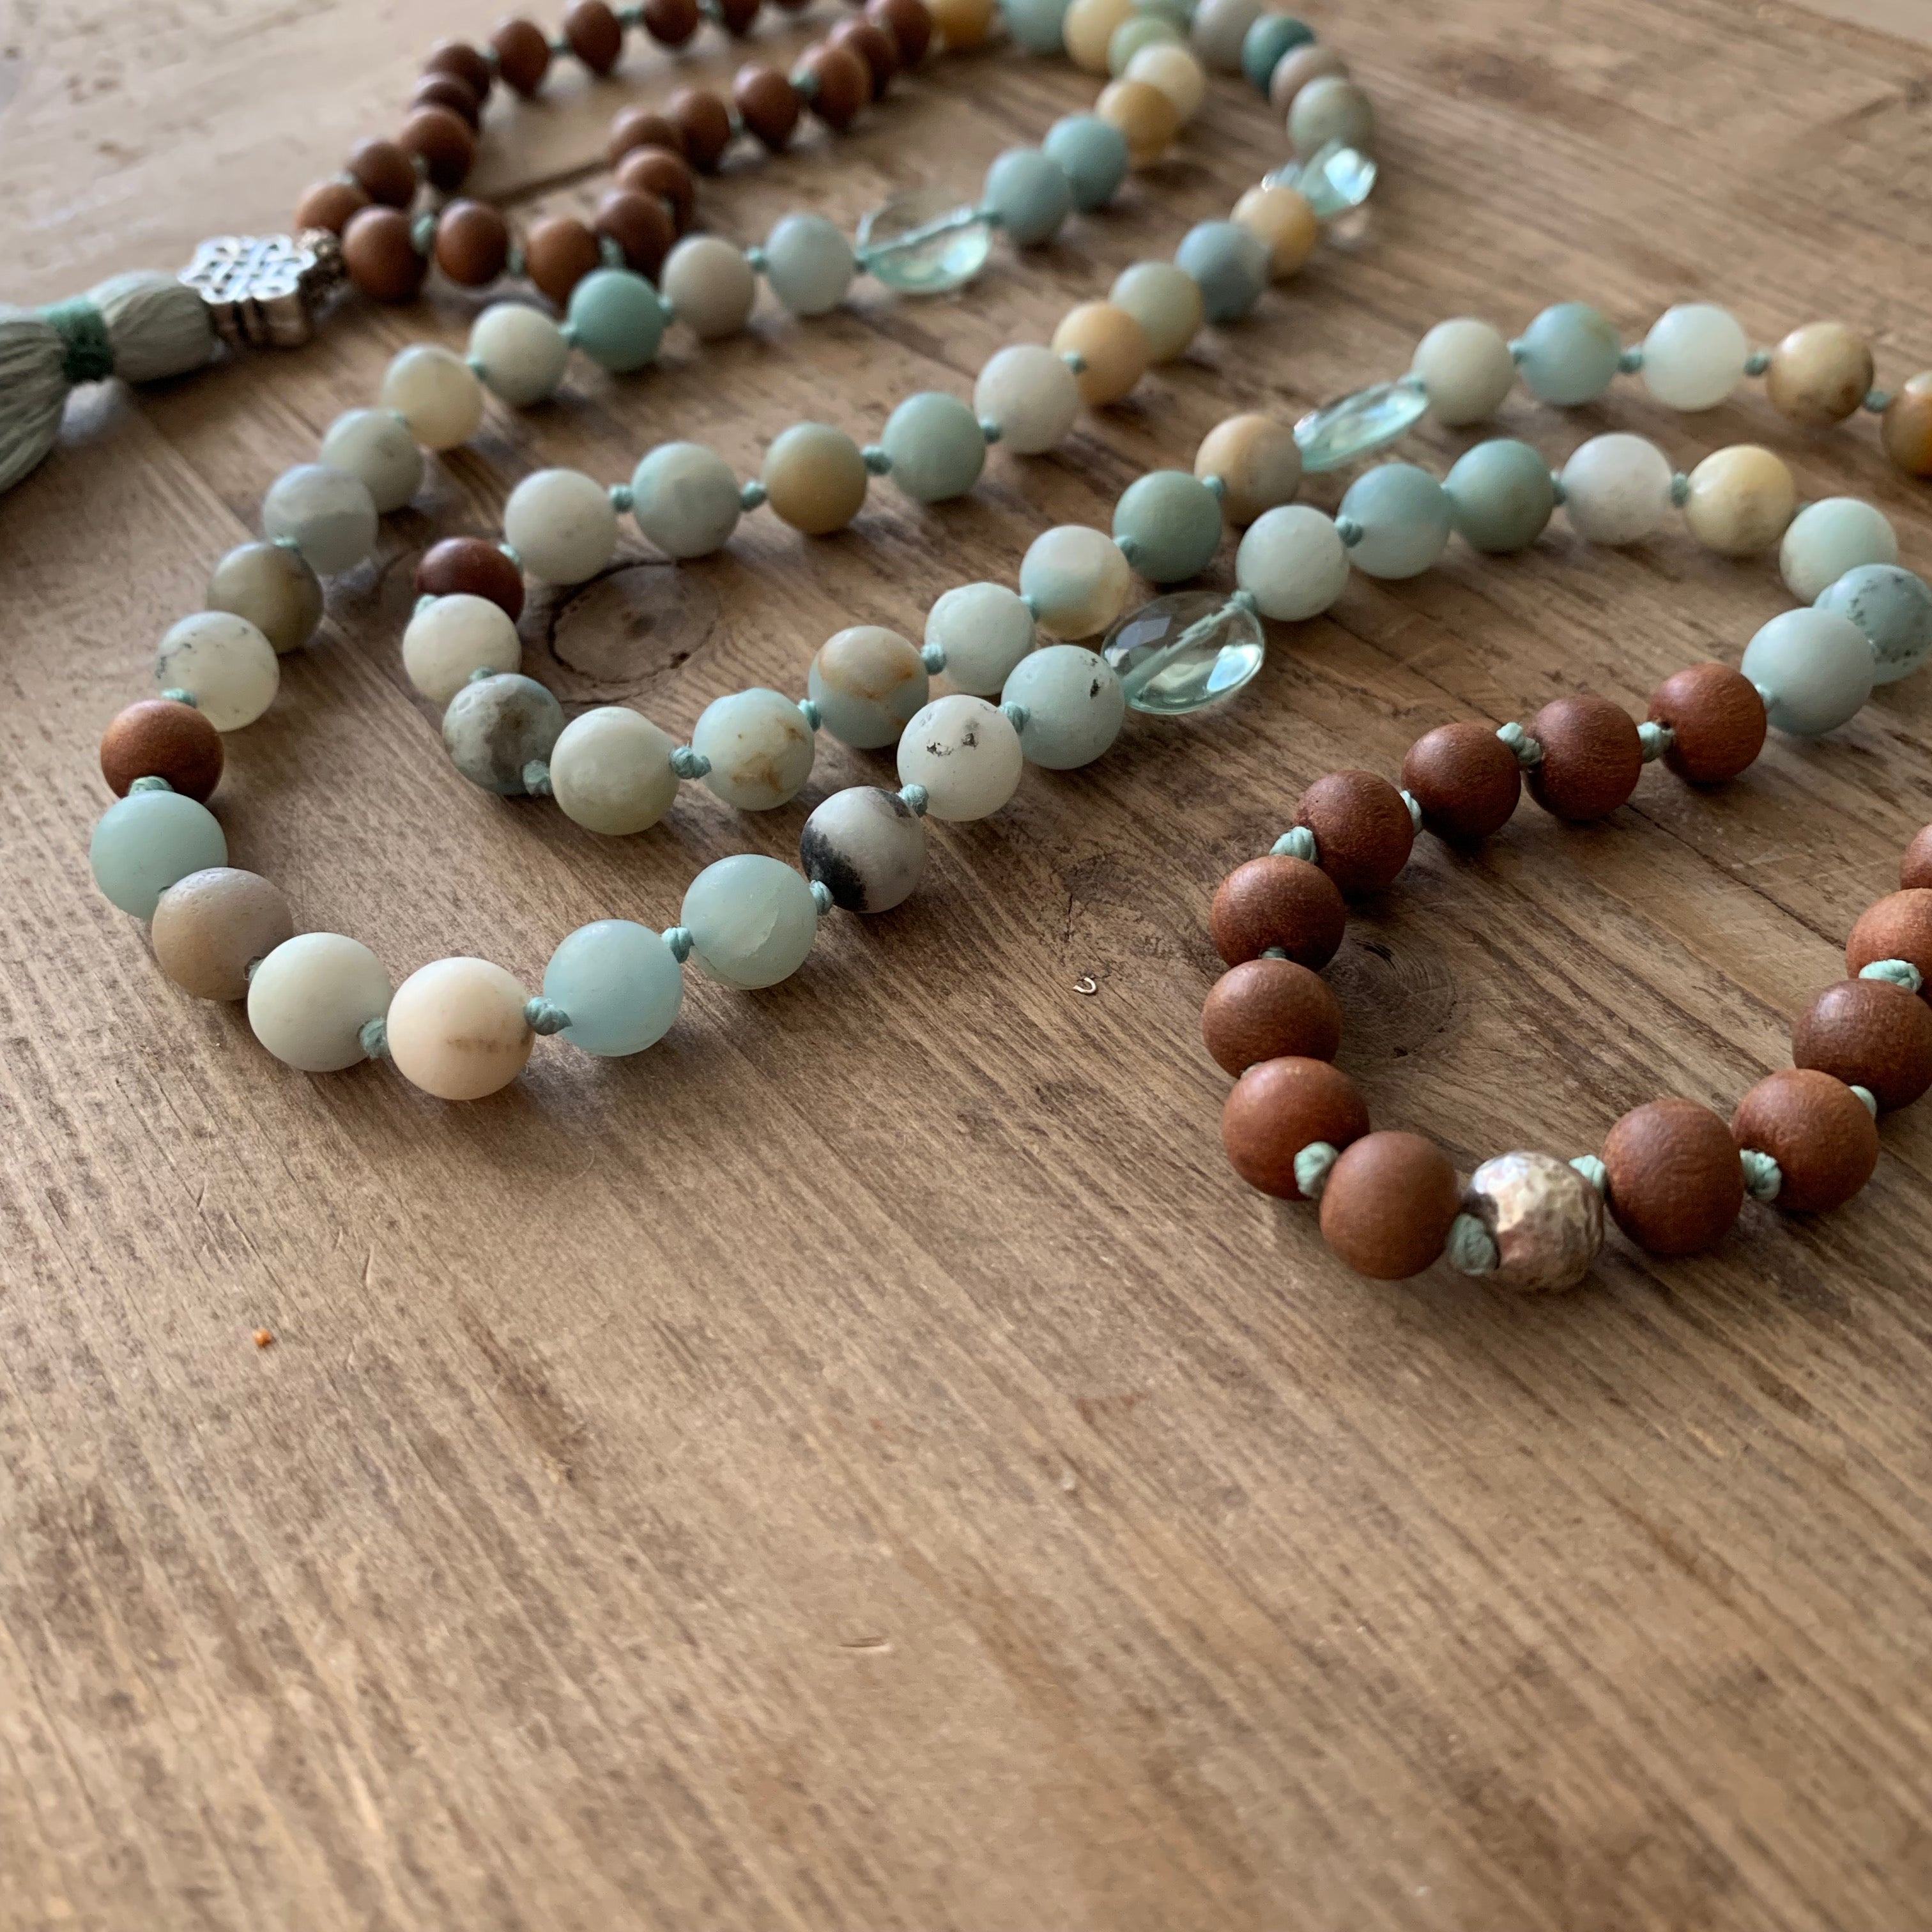 Amazonite and Blue Topaz with Sandalwood 108 Bead Mala with Sterling Silver Knot Guru Bead